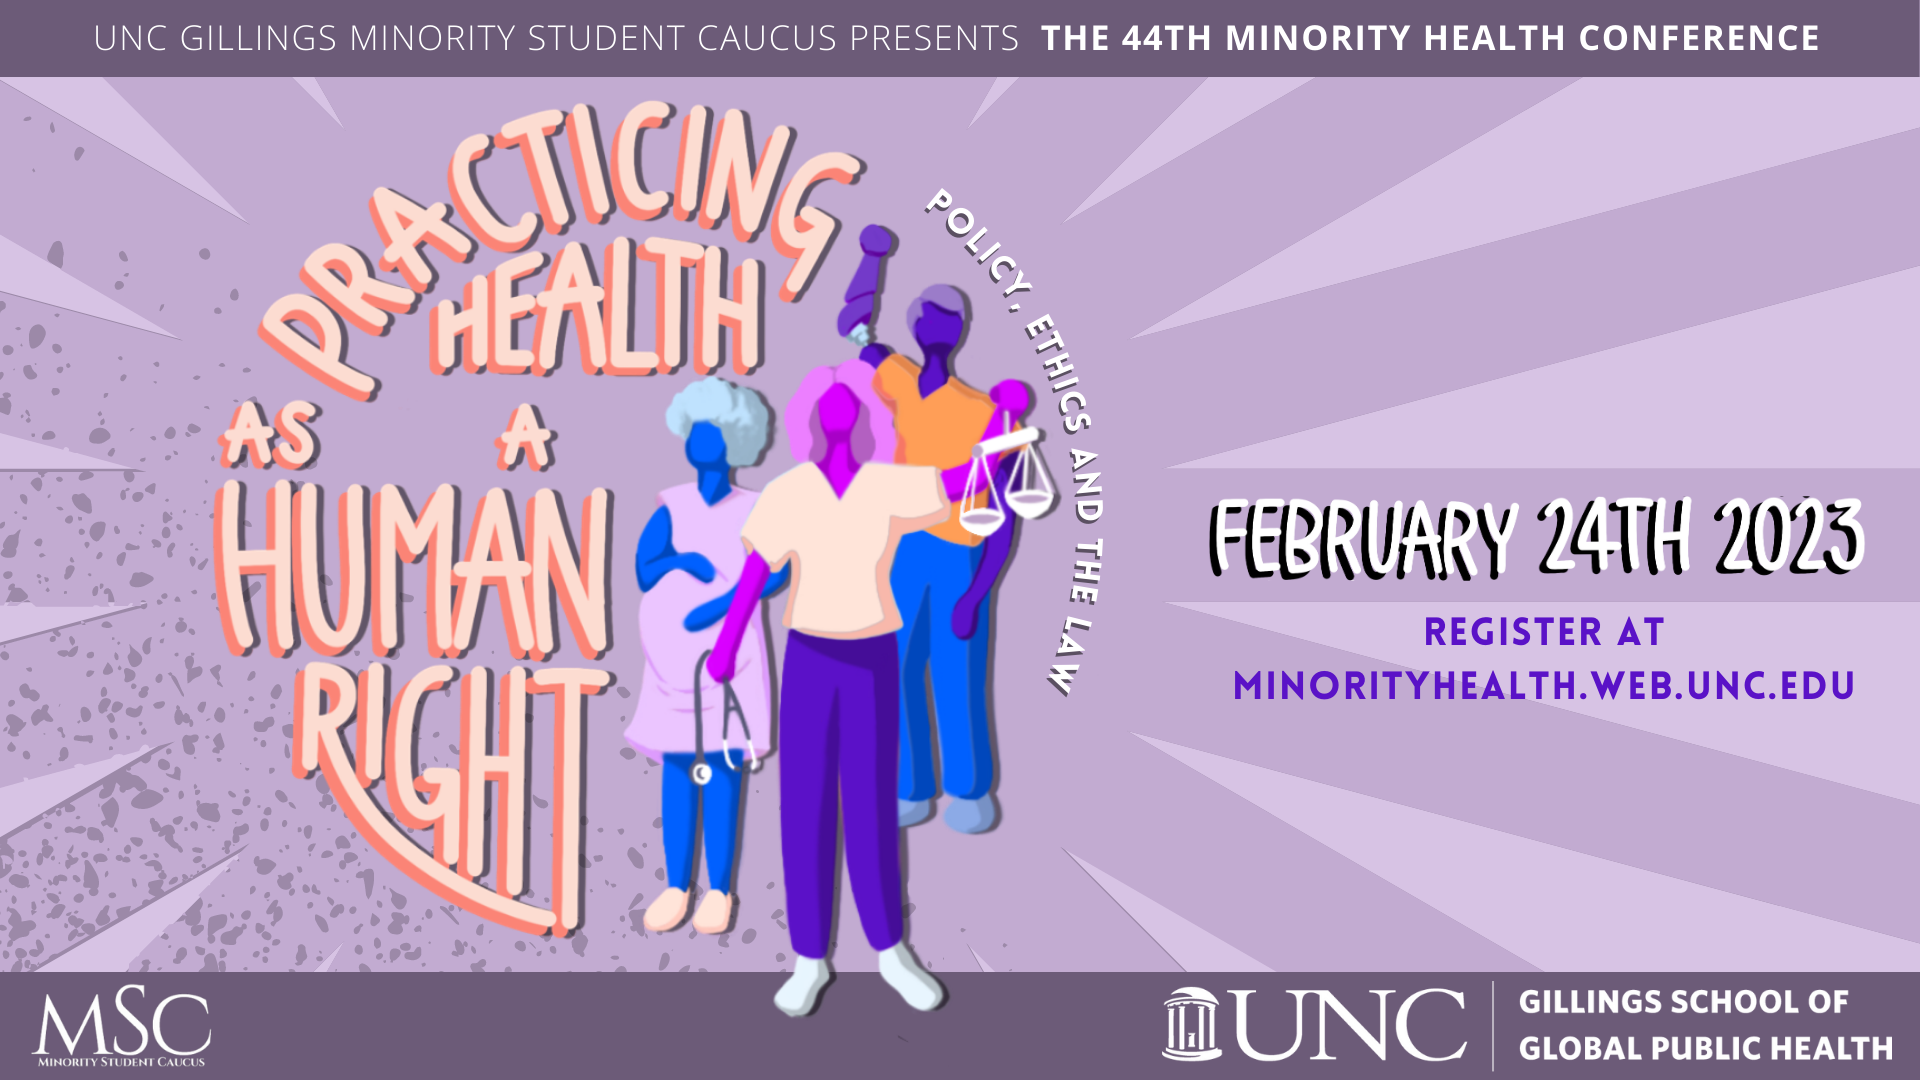 UNC Gillings Minority Student Caucus presents the 44th Minority Health Conference: Practicing Health as a Human Right. Policy, Ethics, and the Law. February 24th 2023. Register at MinorityHealth.web.unc.edu.